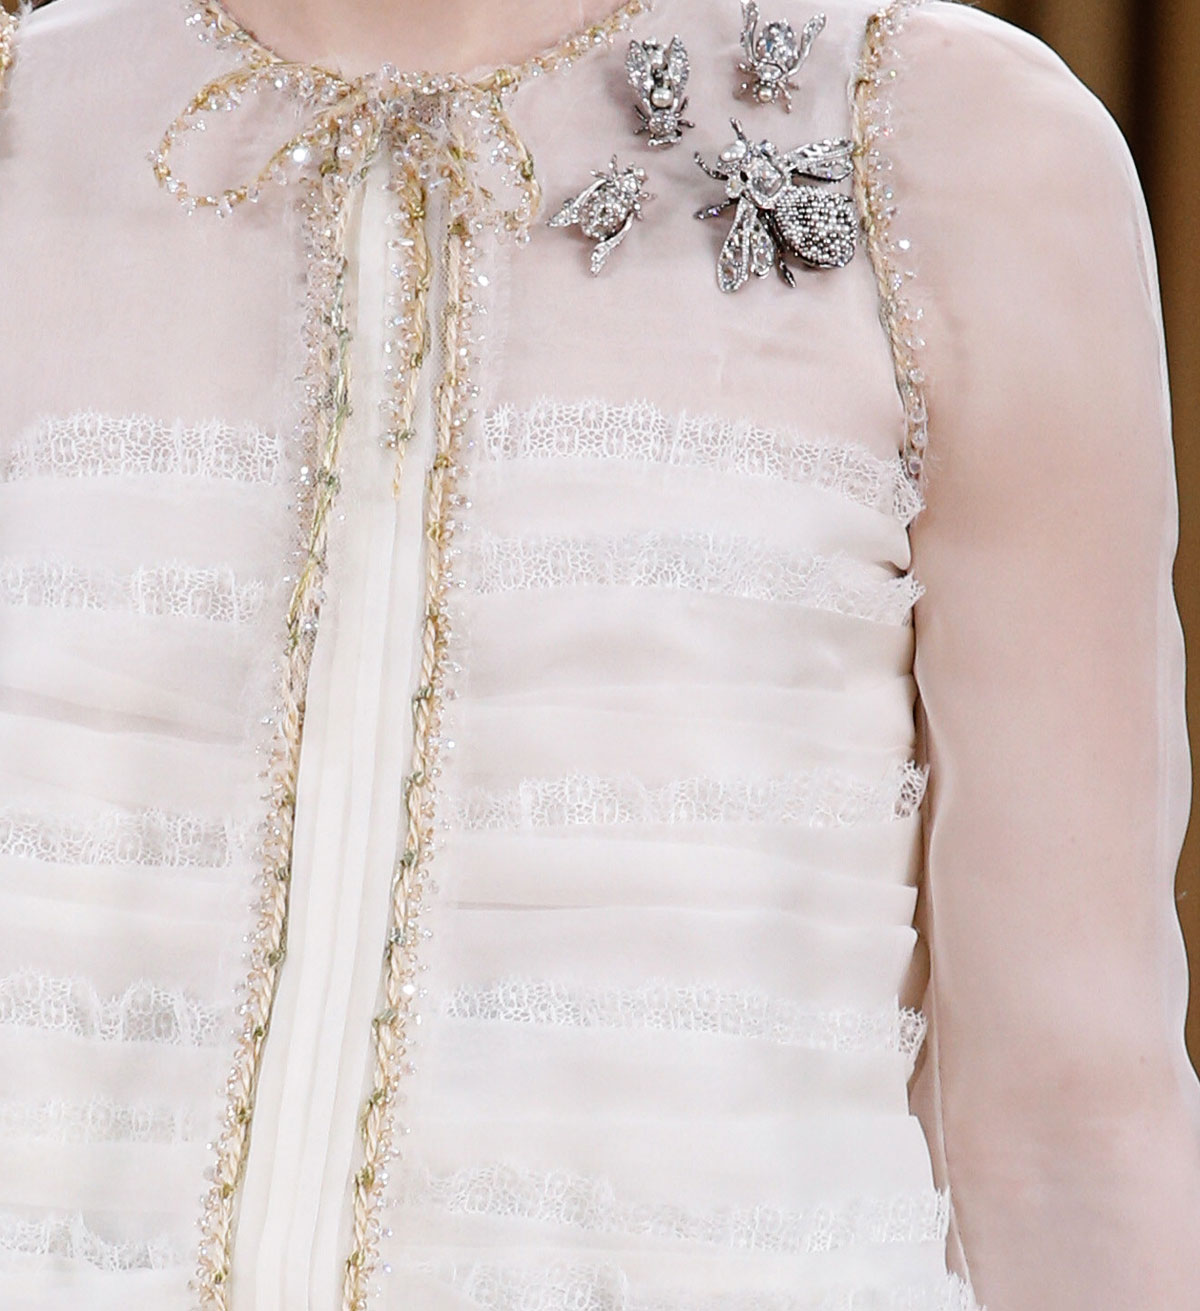 white blouse details Chanel Couture Spring 2016